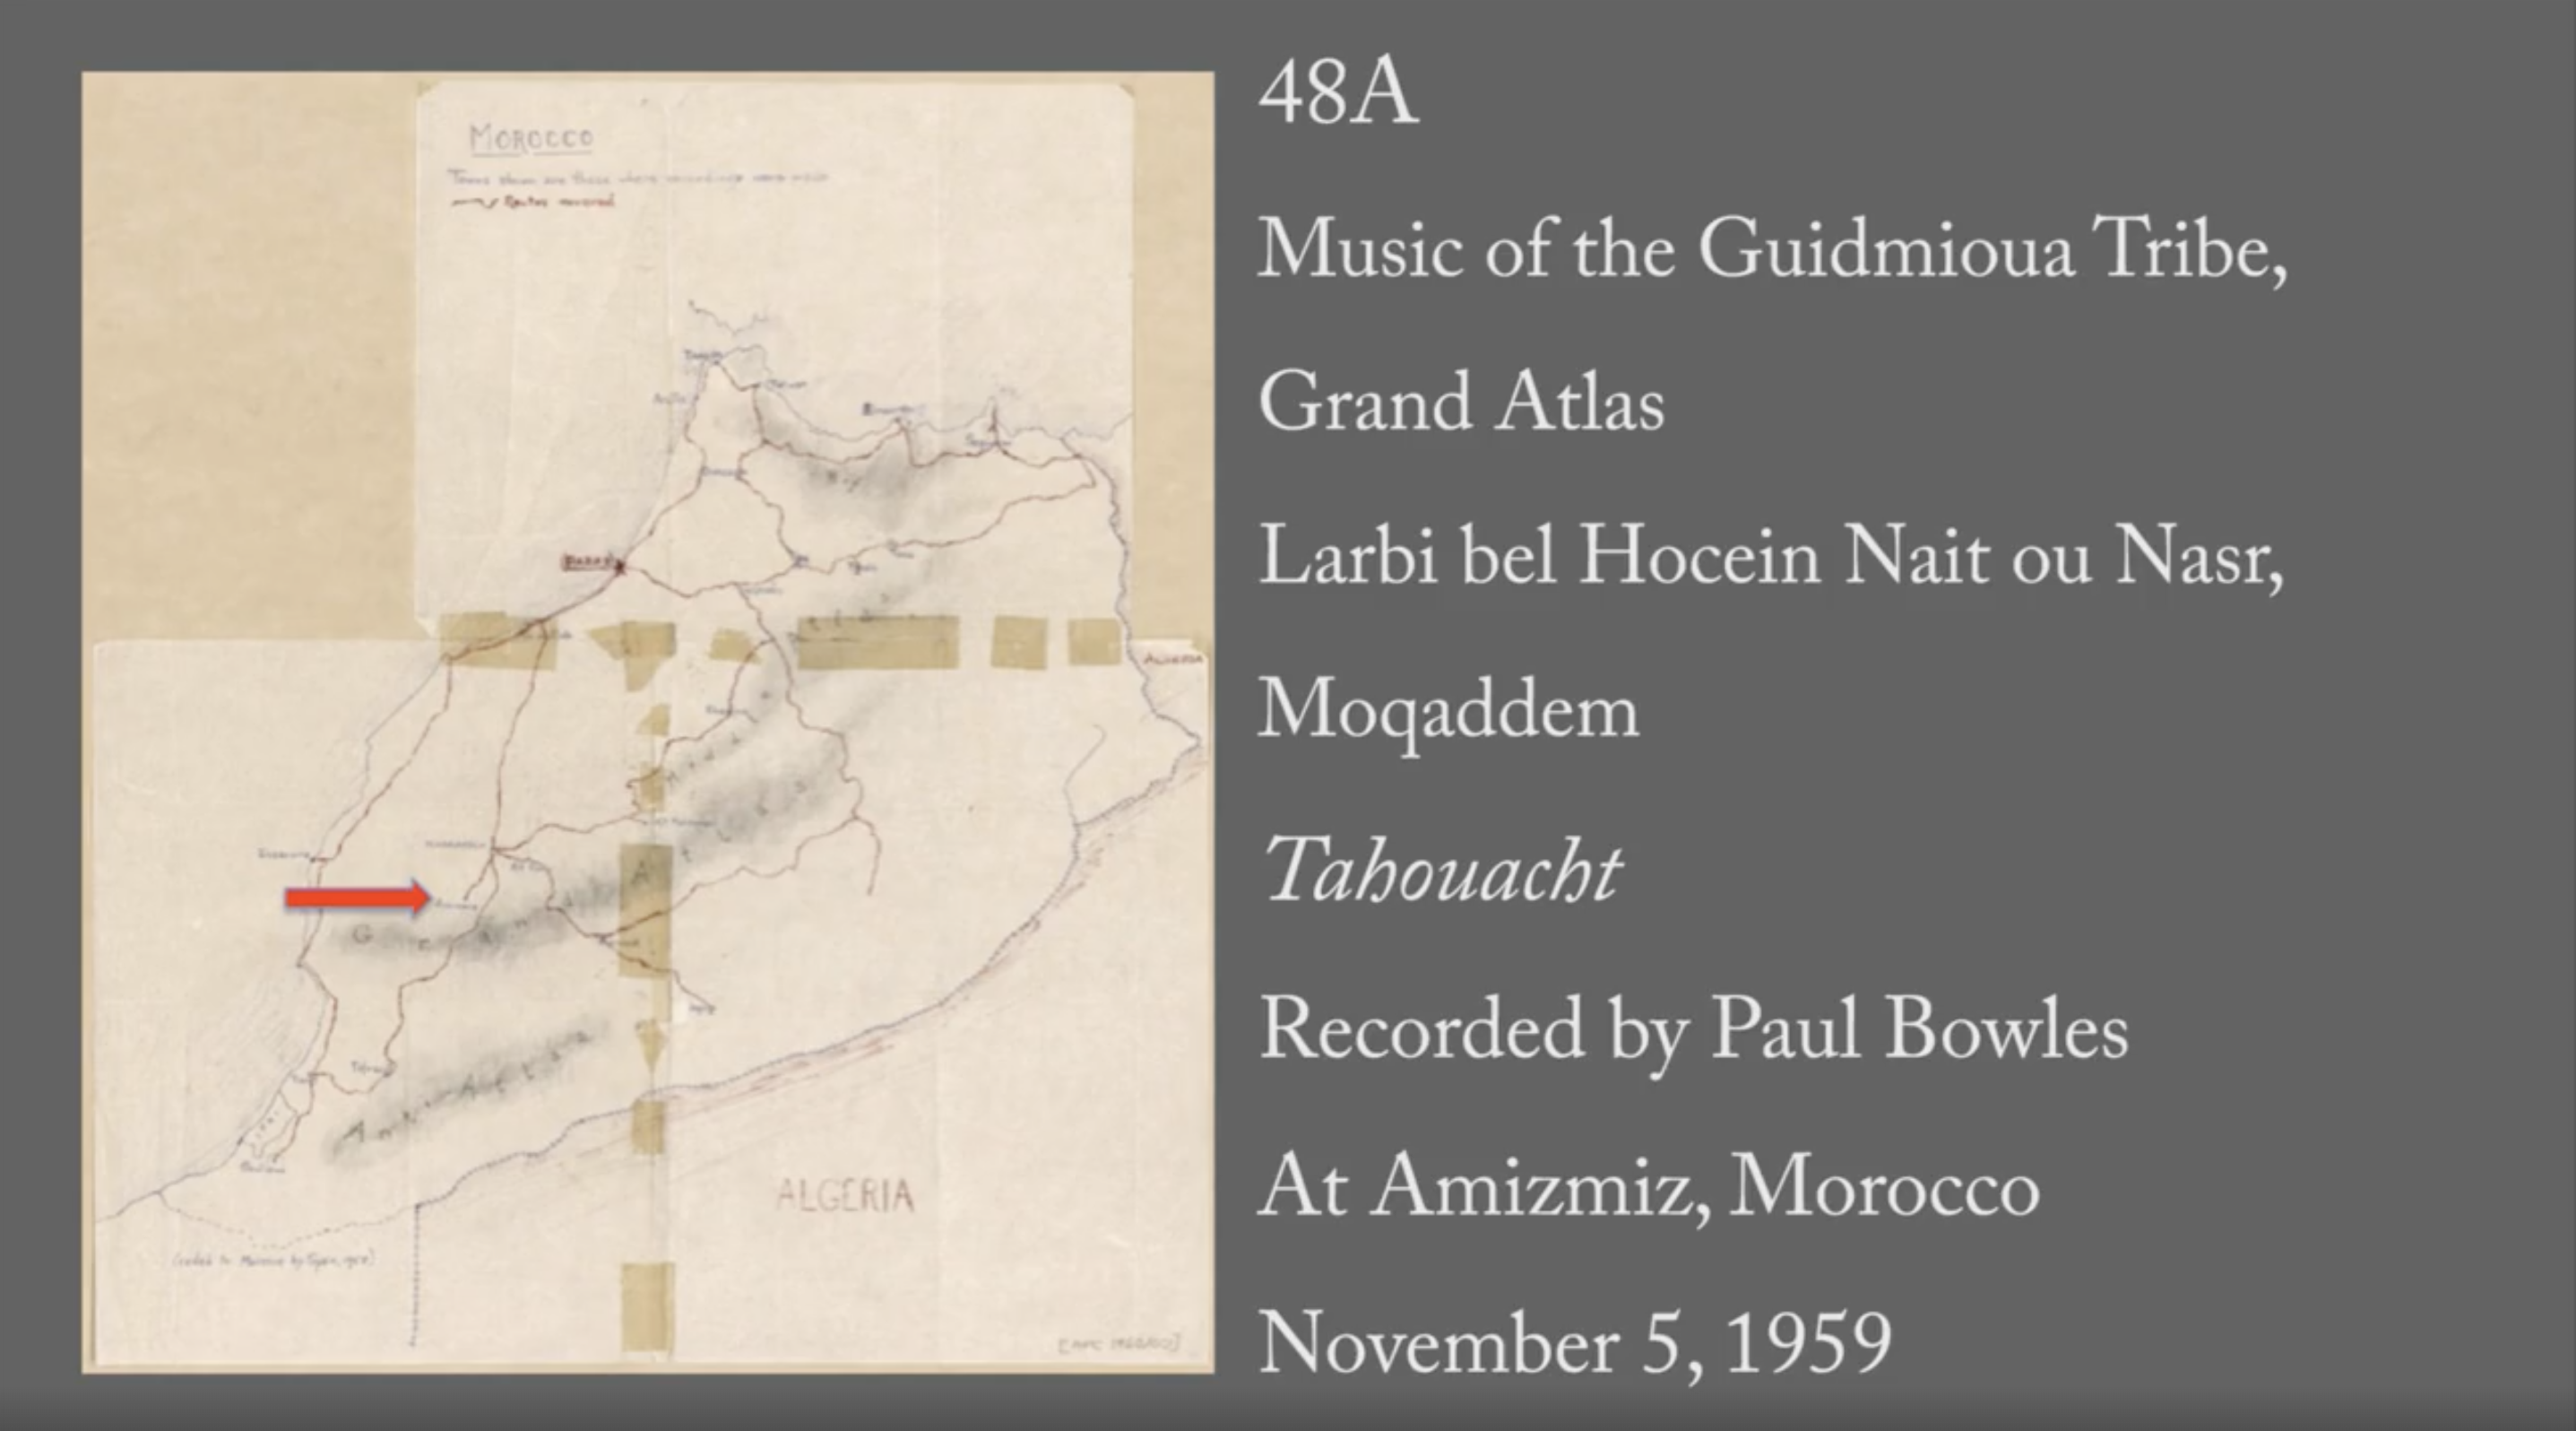 Larbi bel Hocein Nait ou Nasr  - 48A: "Tahouacht" (Music of the Guidmioua Tribe)